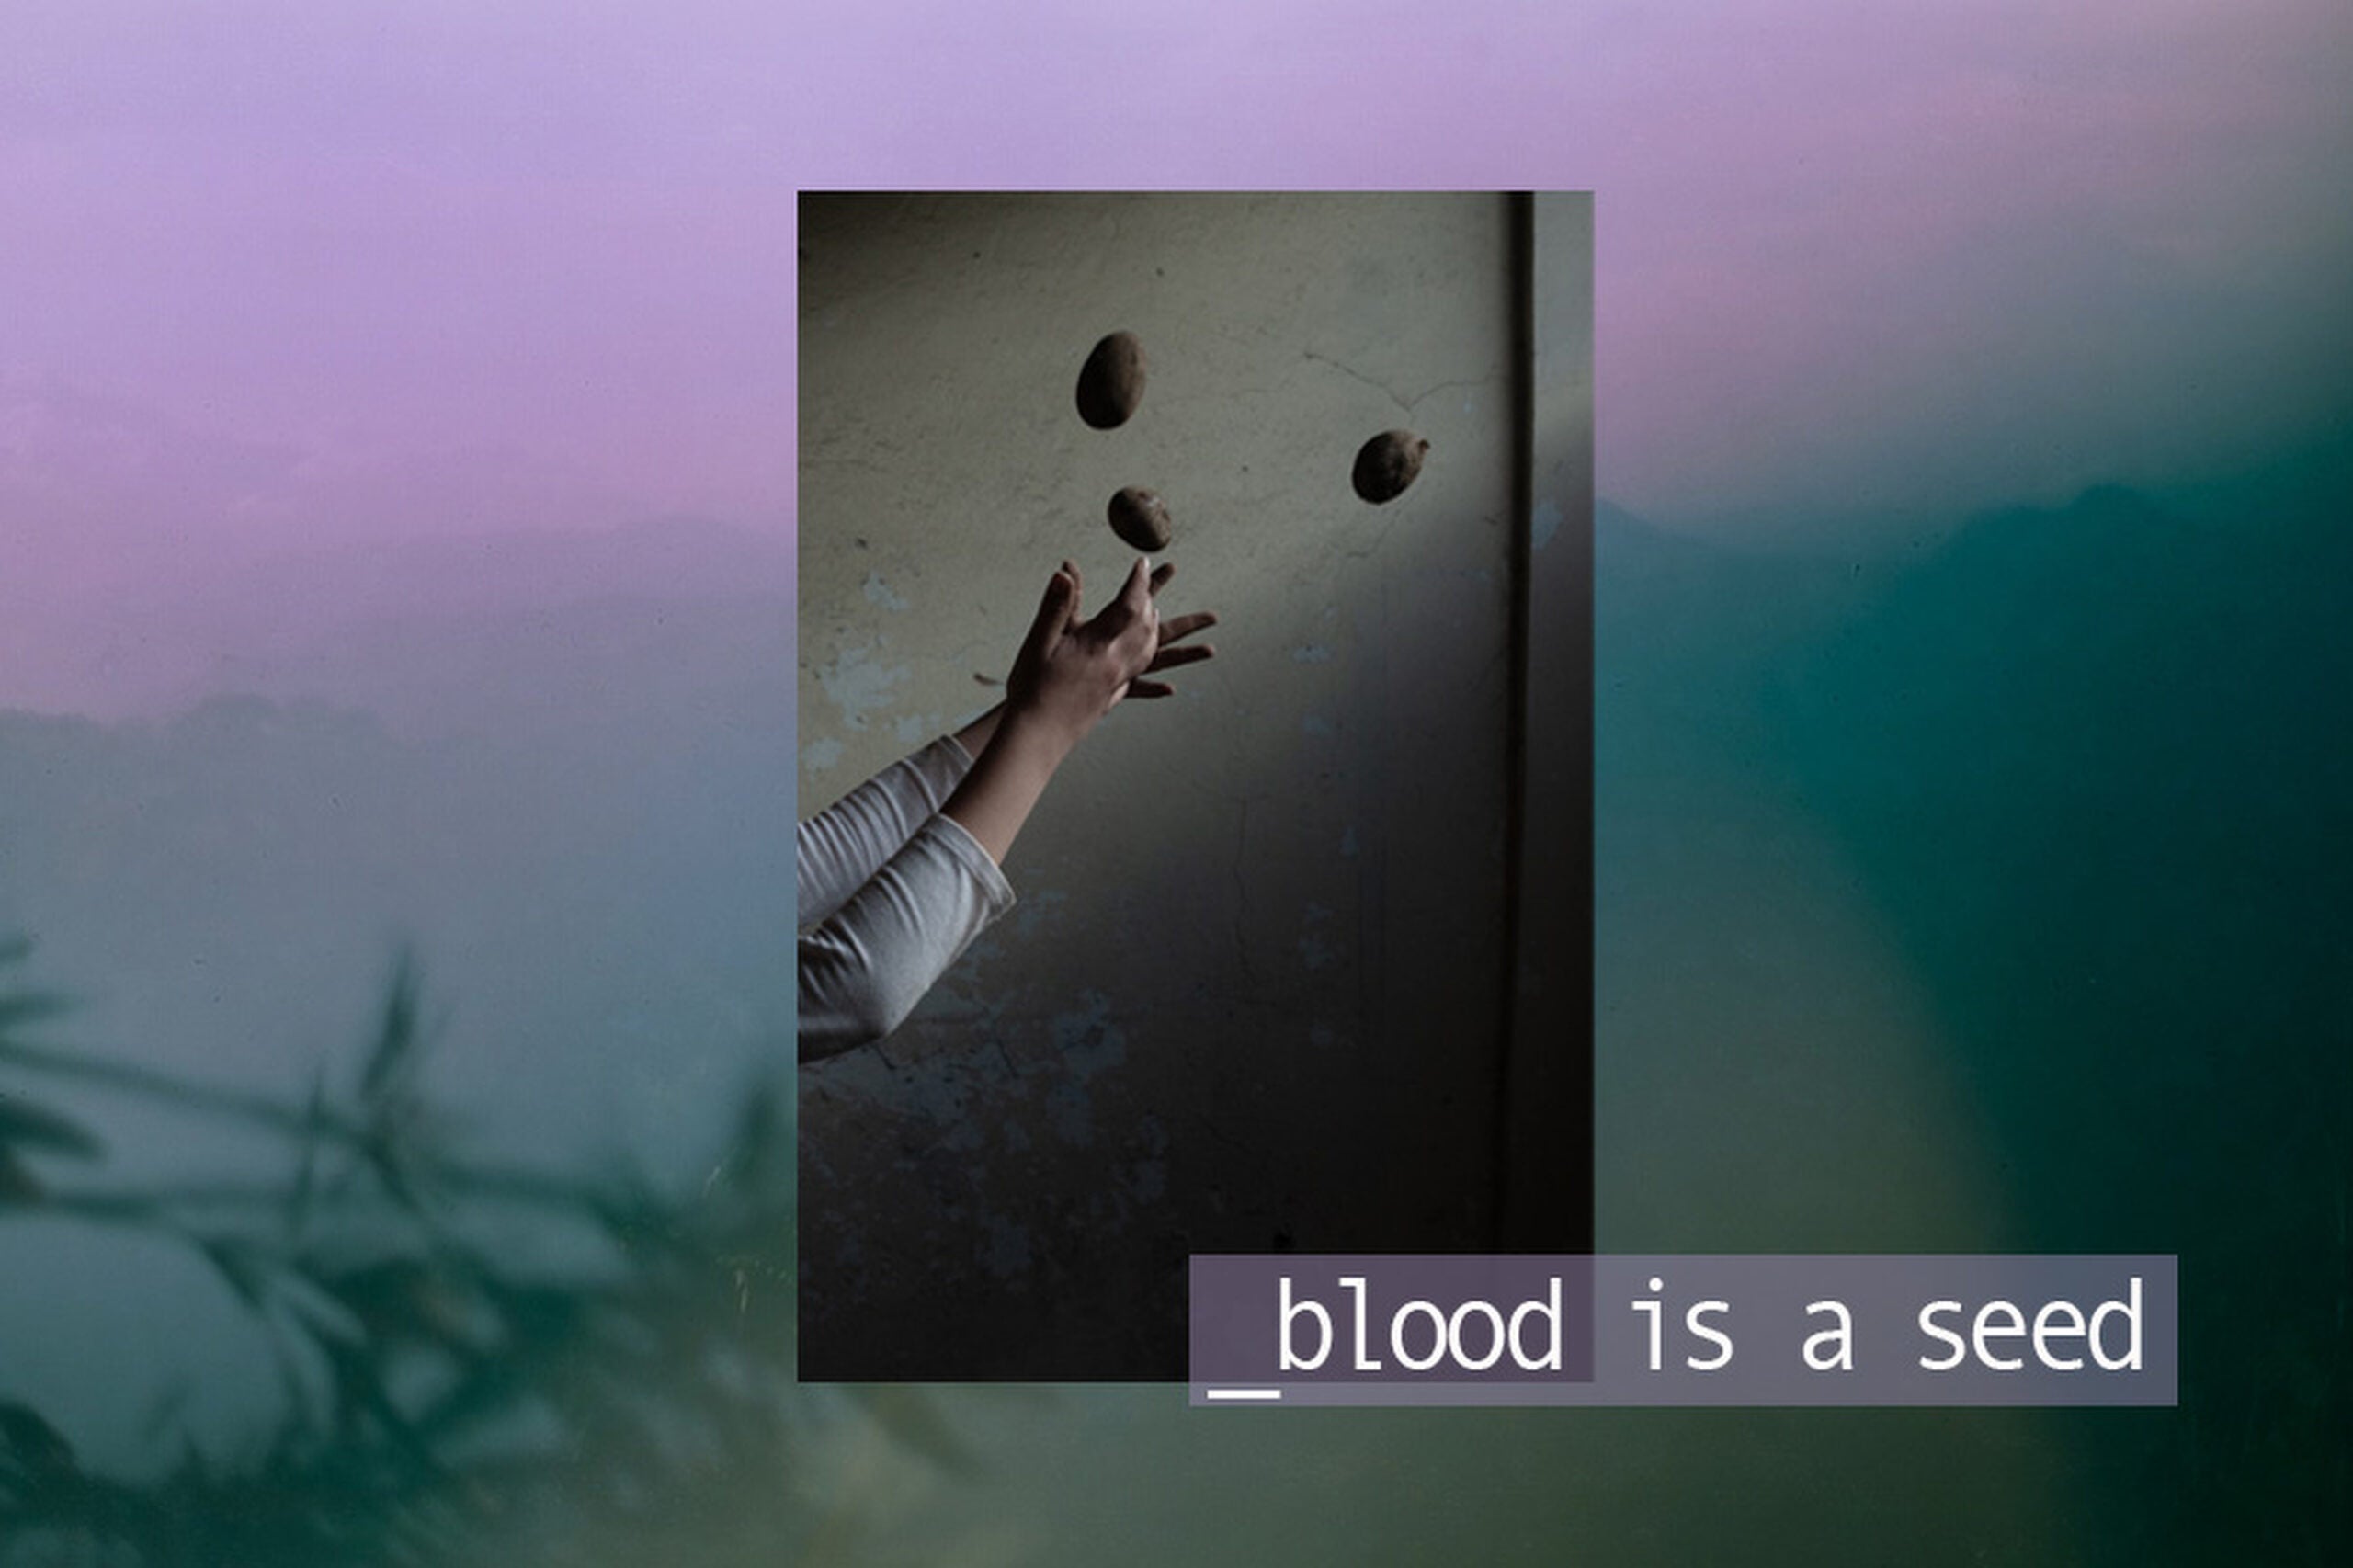 World Press Photo Open Format Award (Global) - Blood is a Seed by Isadora Romero